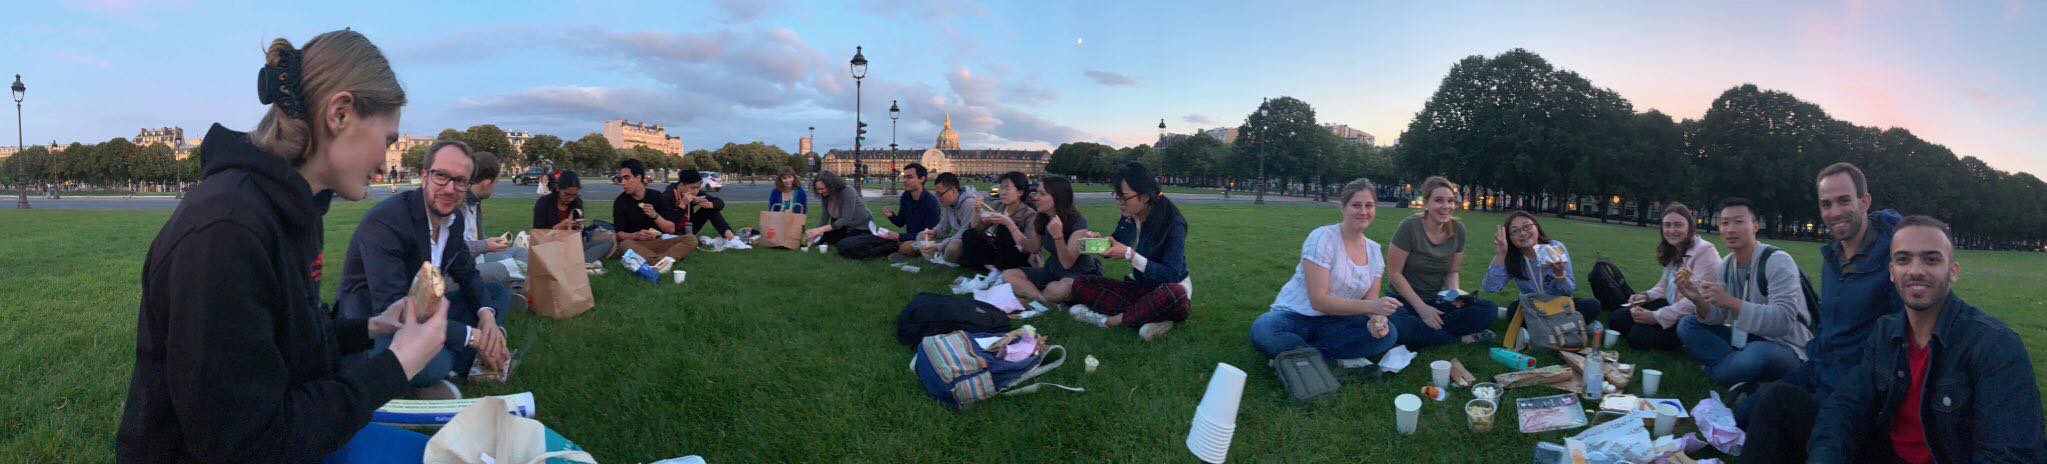 Aside from science, we had a great gathering picnic in front of the Invalides with Dr. Emma MacPherson's group from Warwick, UK, and our friends from Syracuse, US.